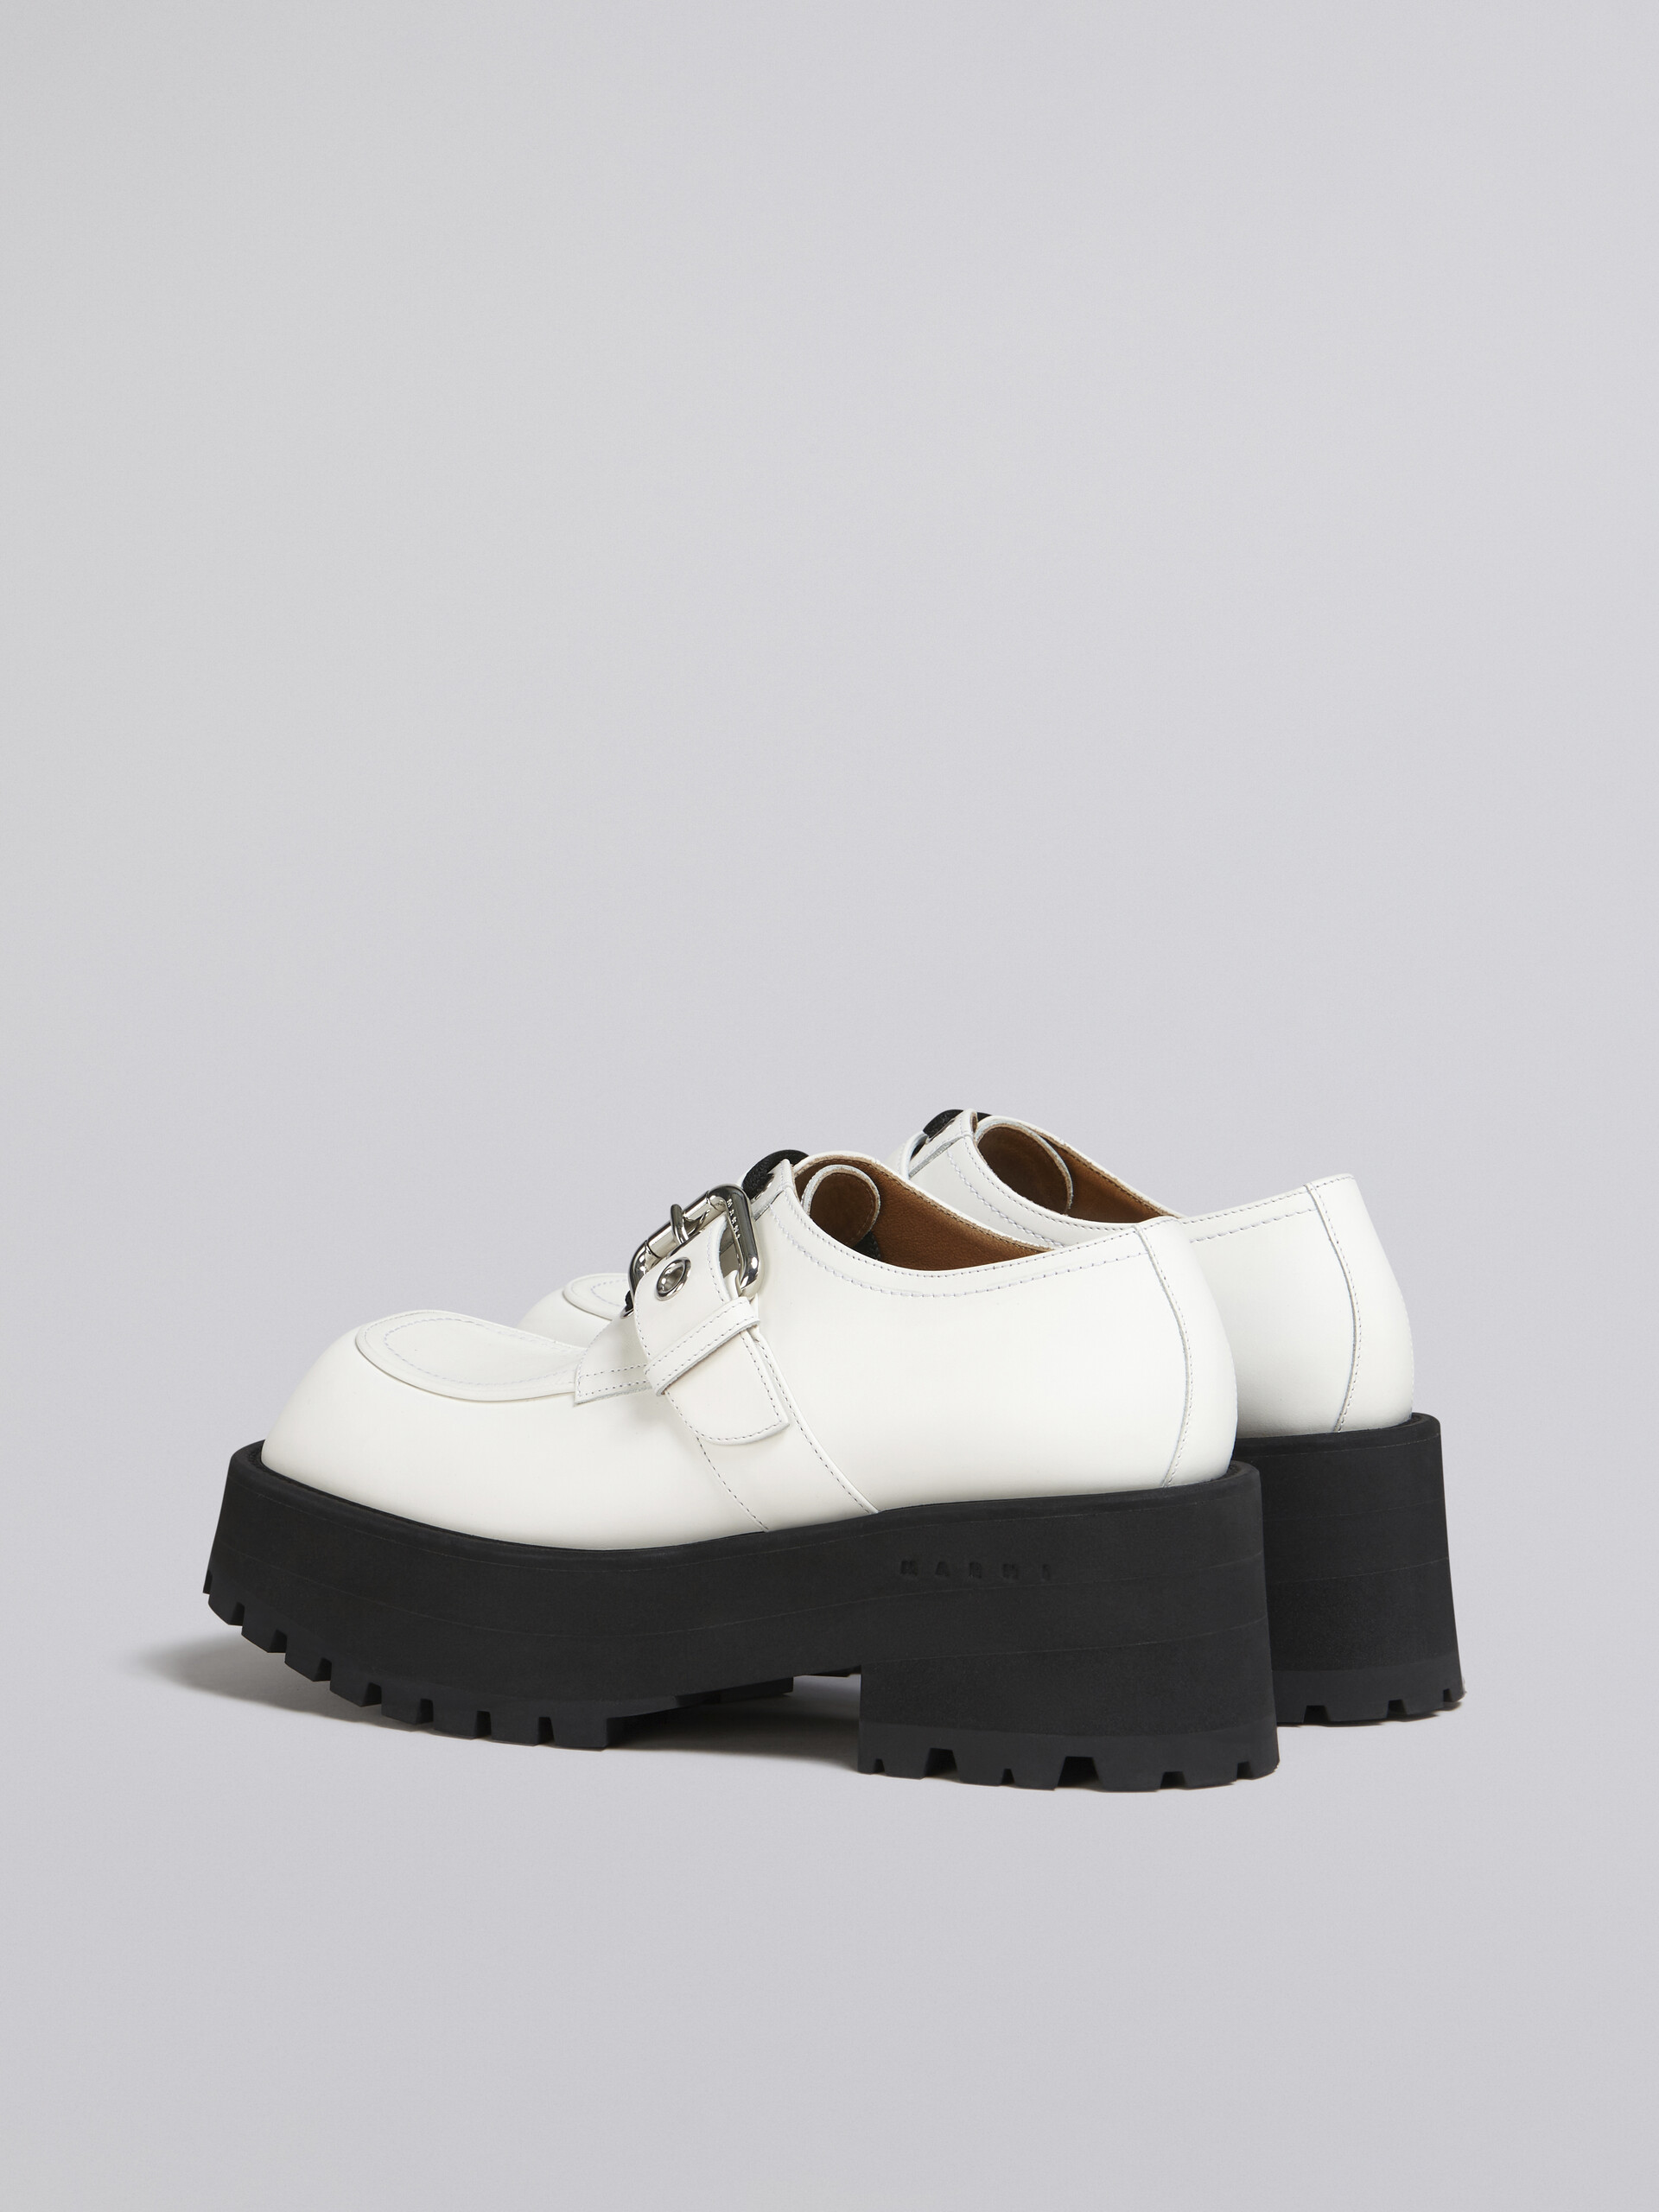 White soft calf leather moccasin - Lace-ups - Image 3